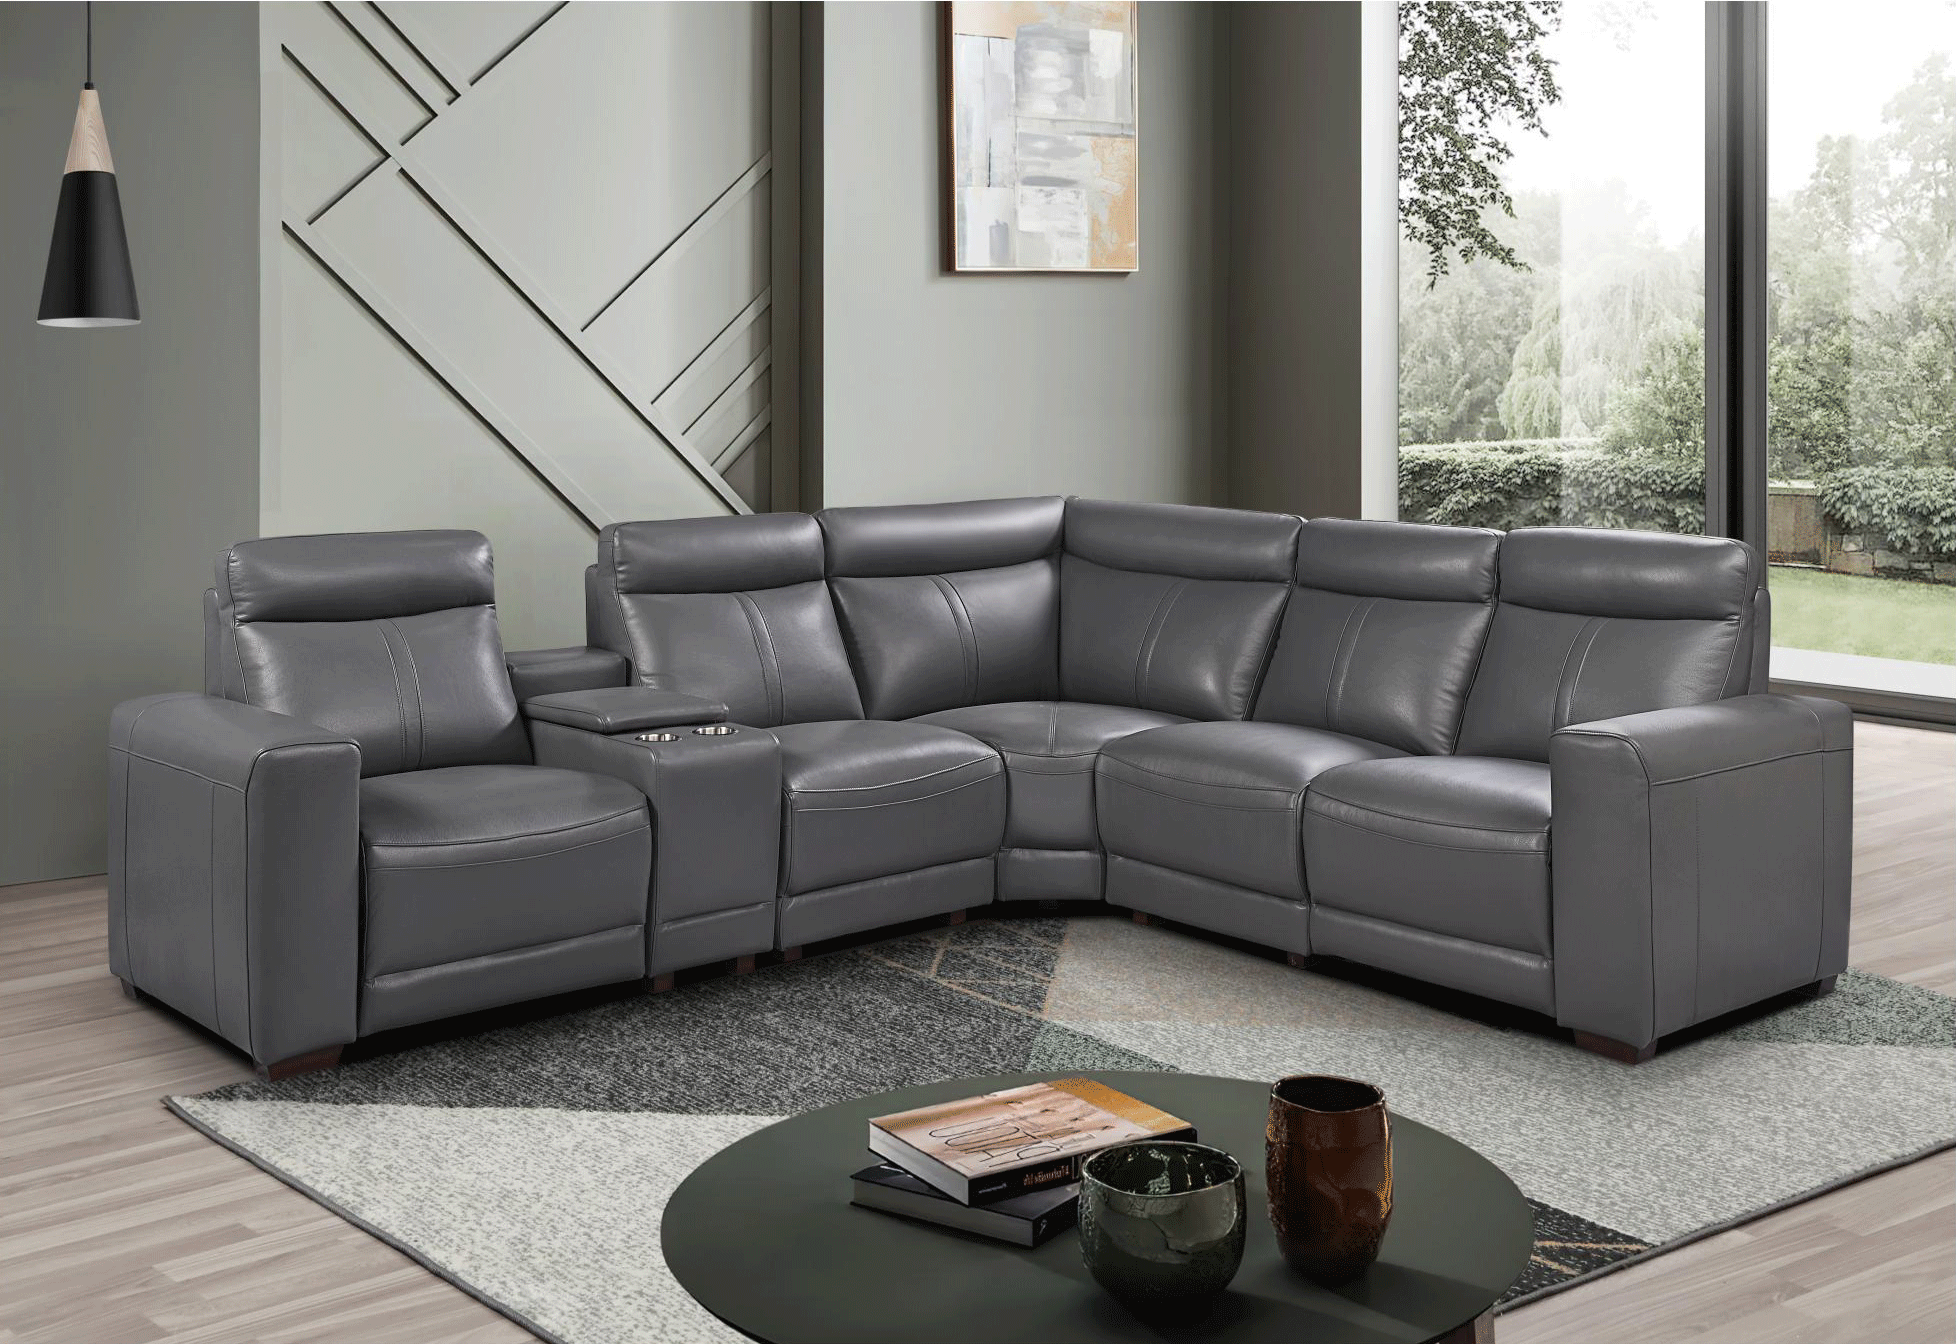 Brands Kuka Home 2777 Sectional w/ recliners